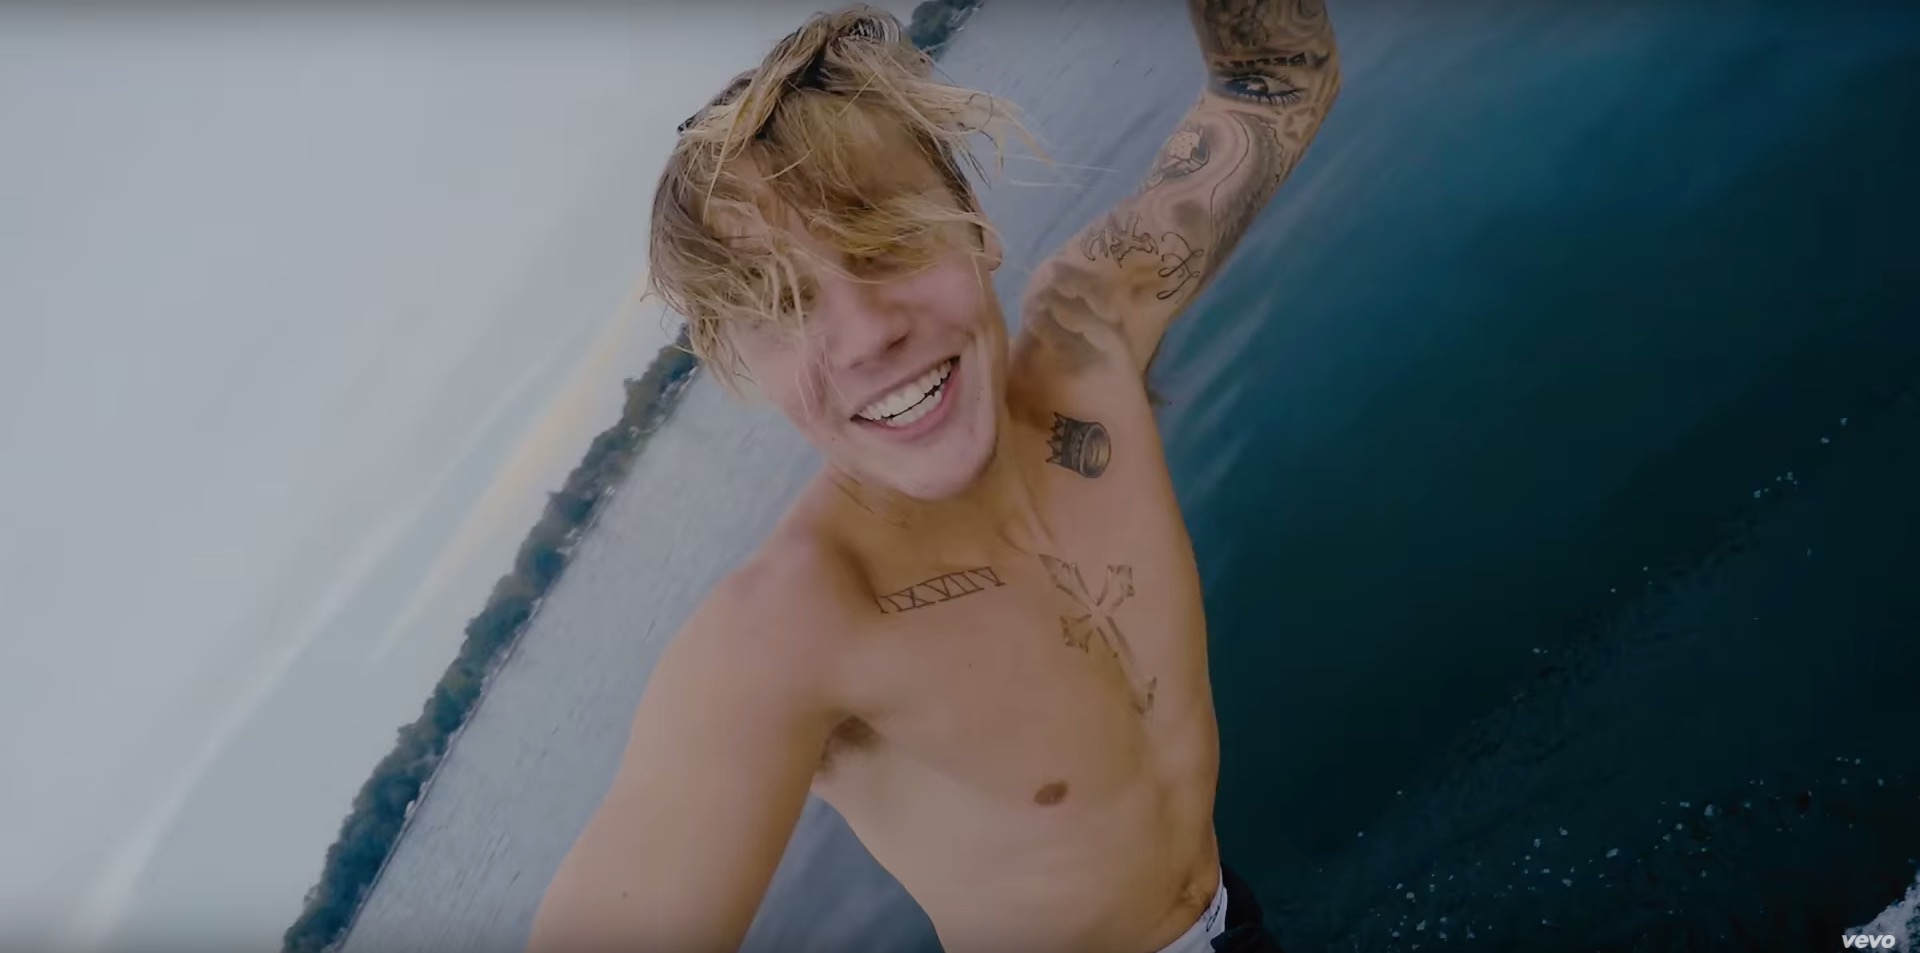 Justin Bieber Travels the World in New Music Video for ‘Company' | RTM - RightThisMinute1920 x 953